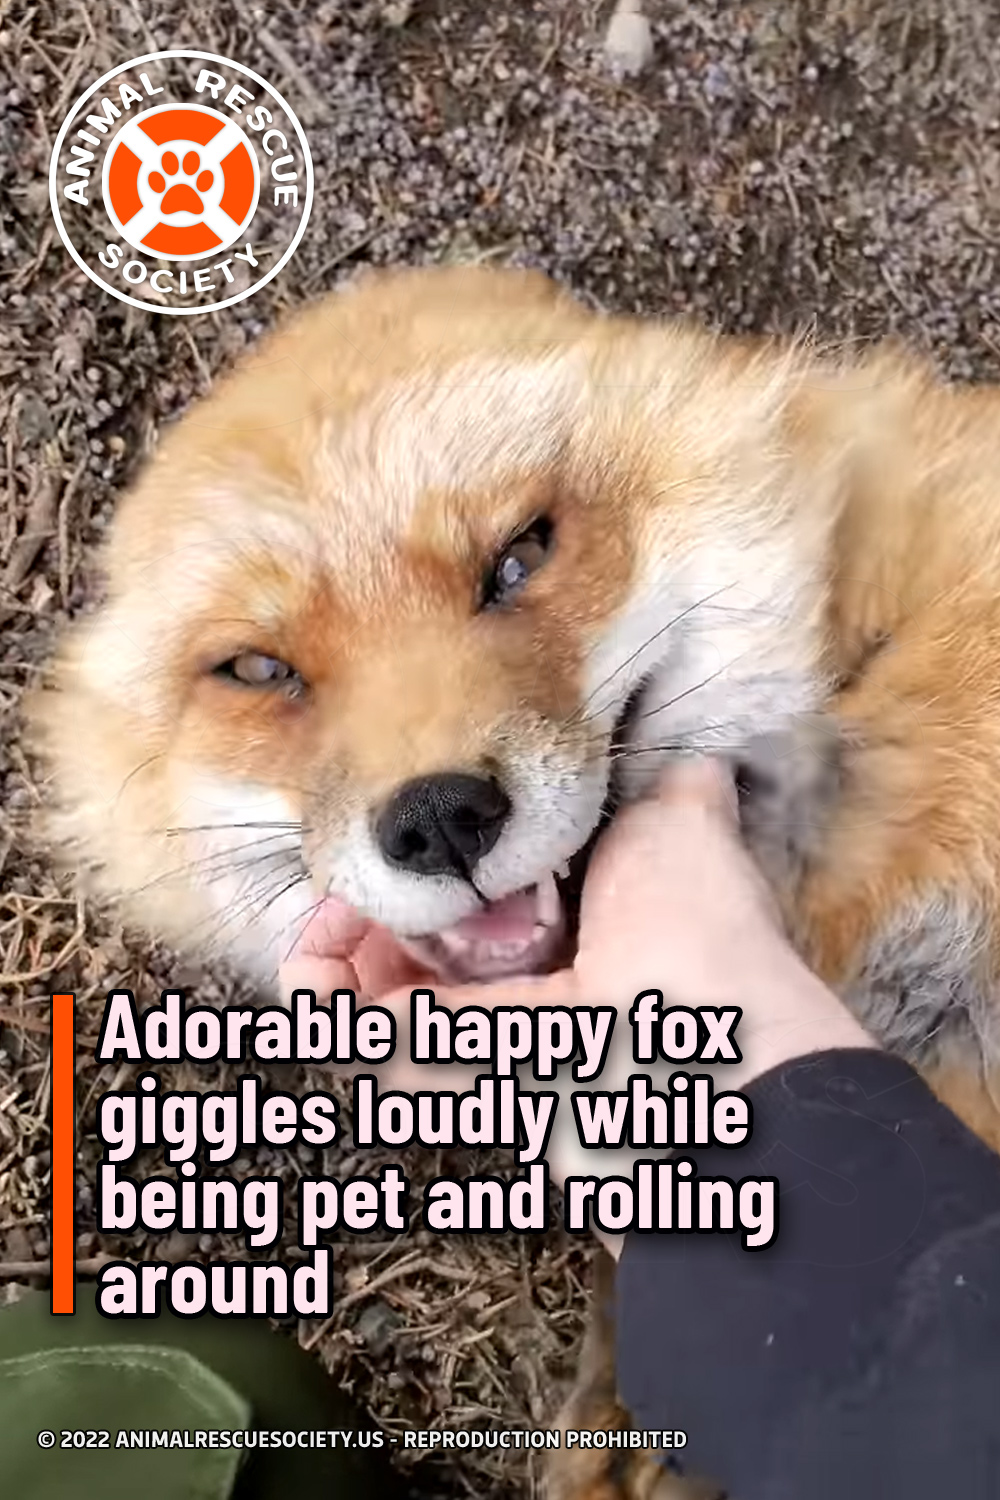 Adorable happy fox giggles loudly while being pet and rolling around